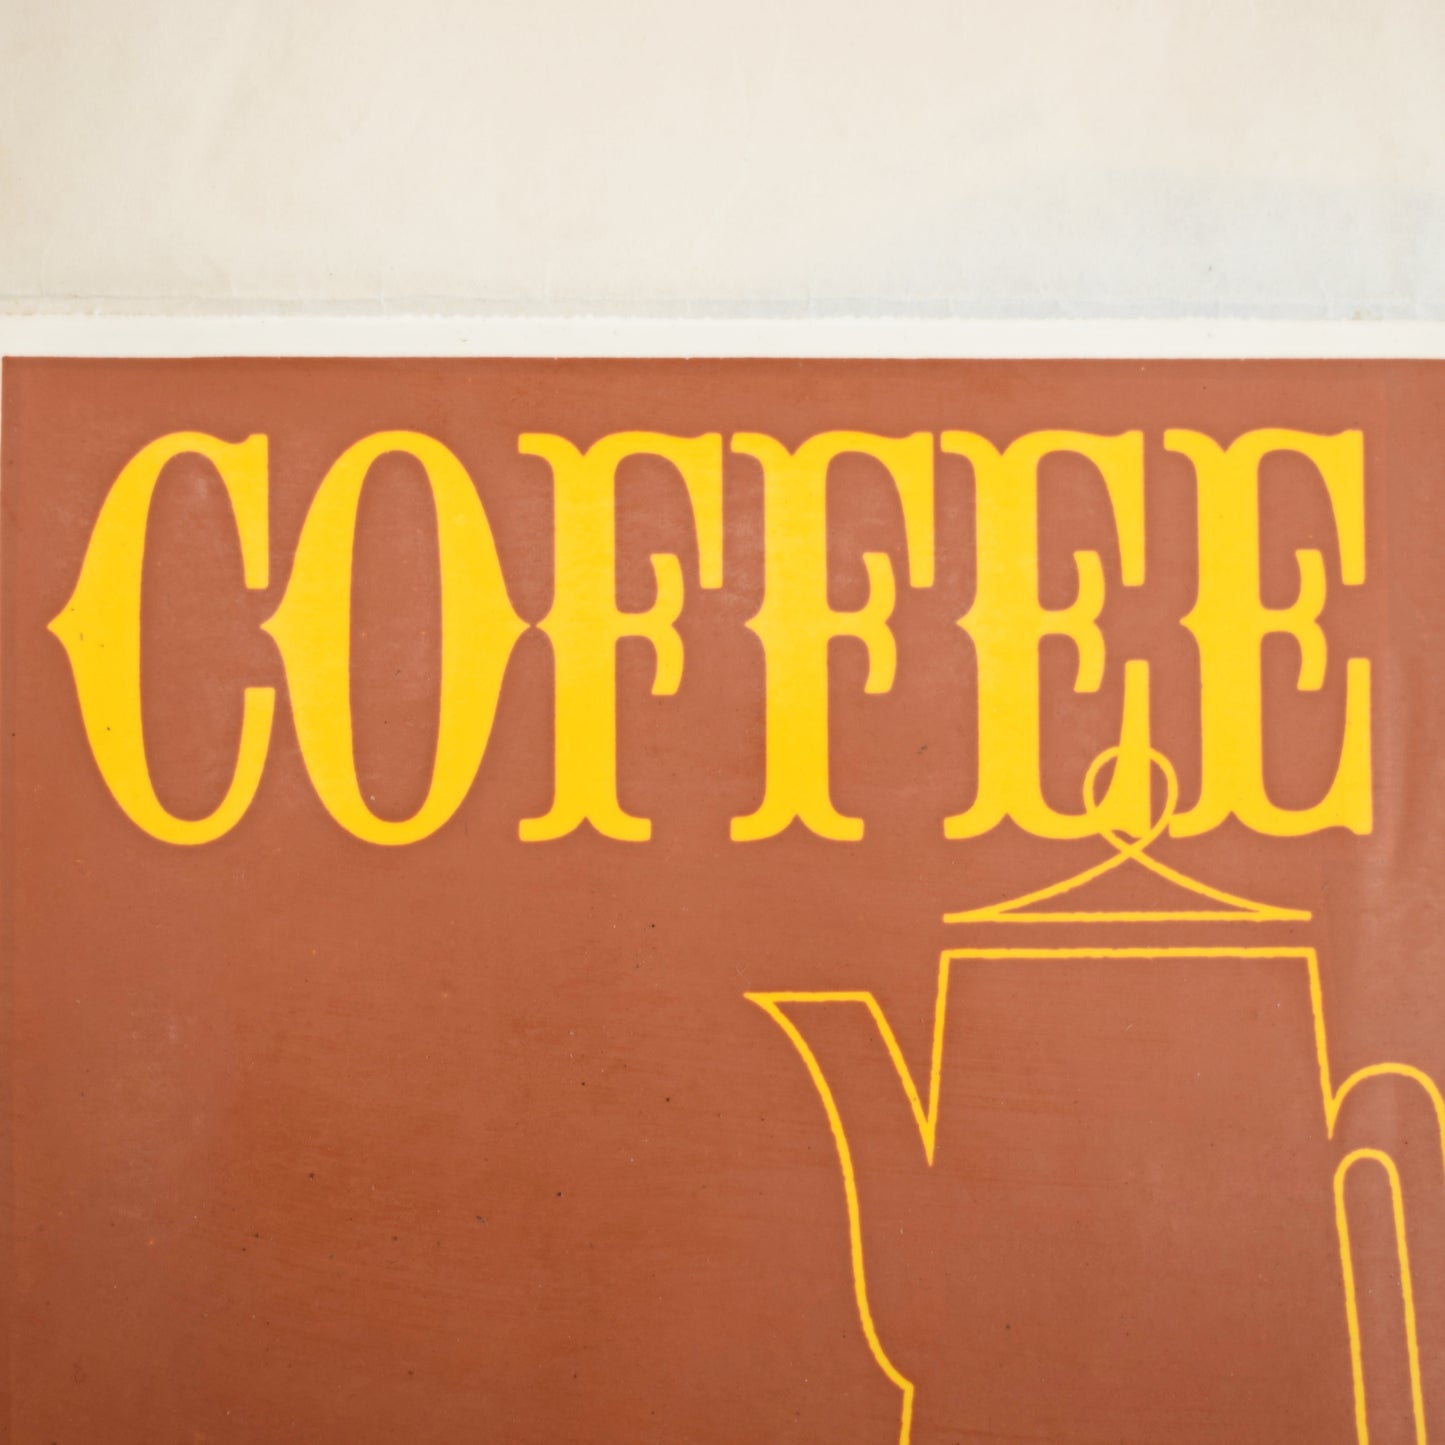 Vintage 1970s Coffee Shop Advertising Stickers